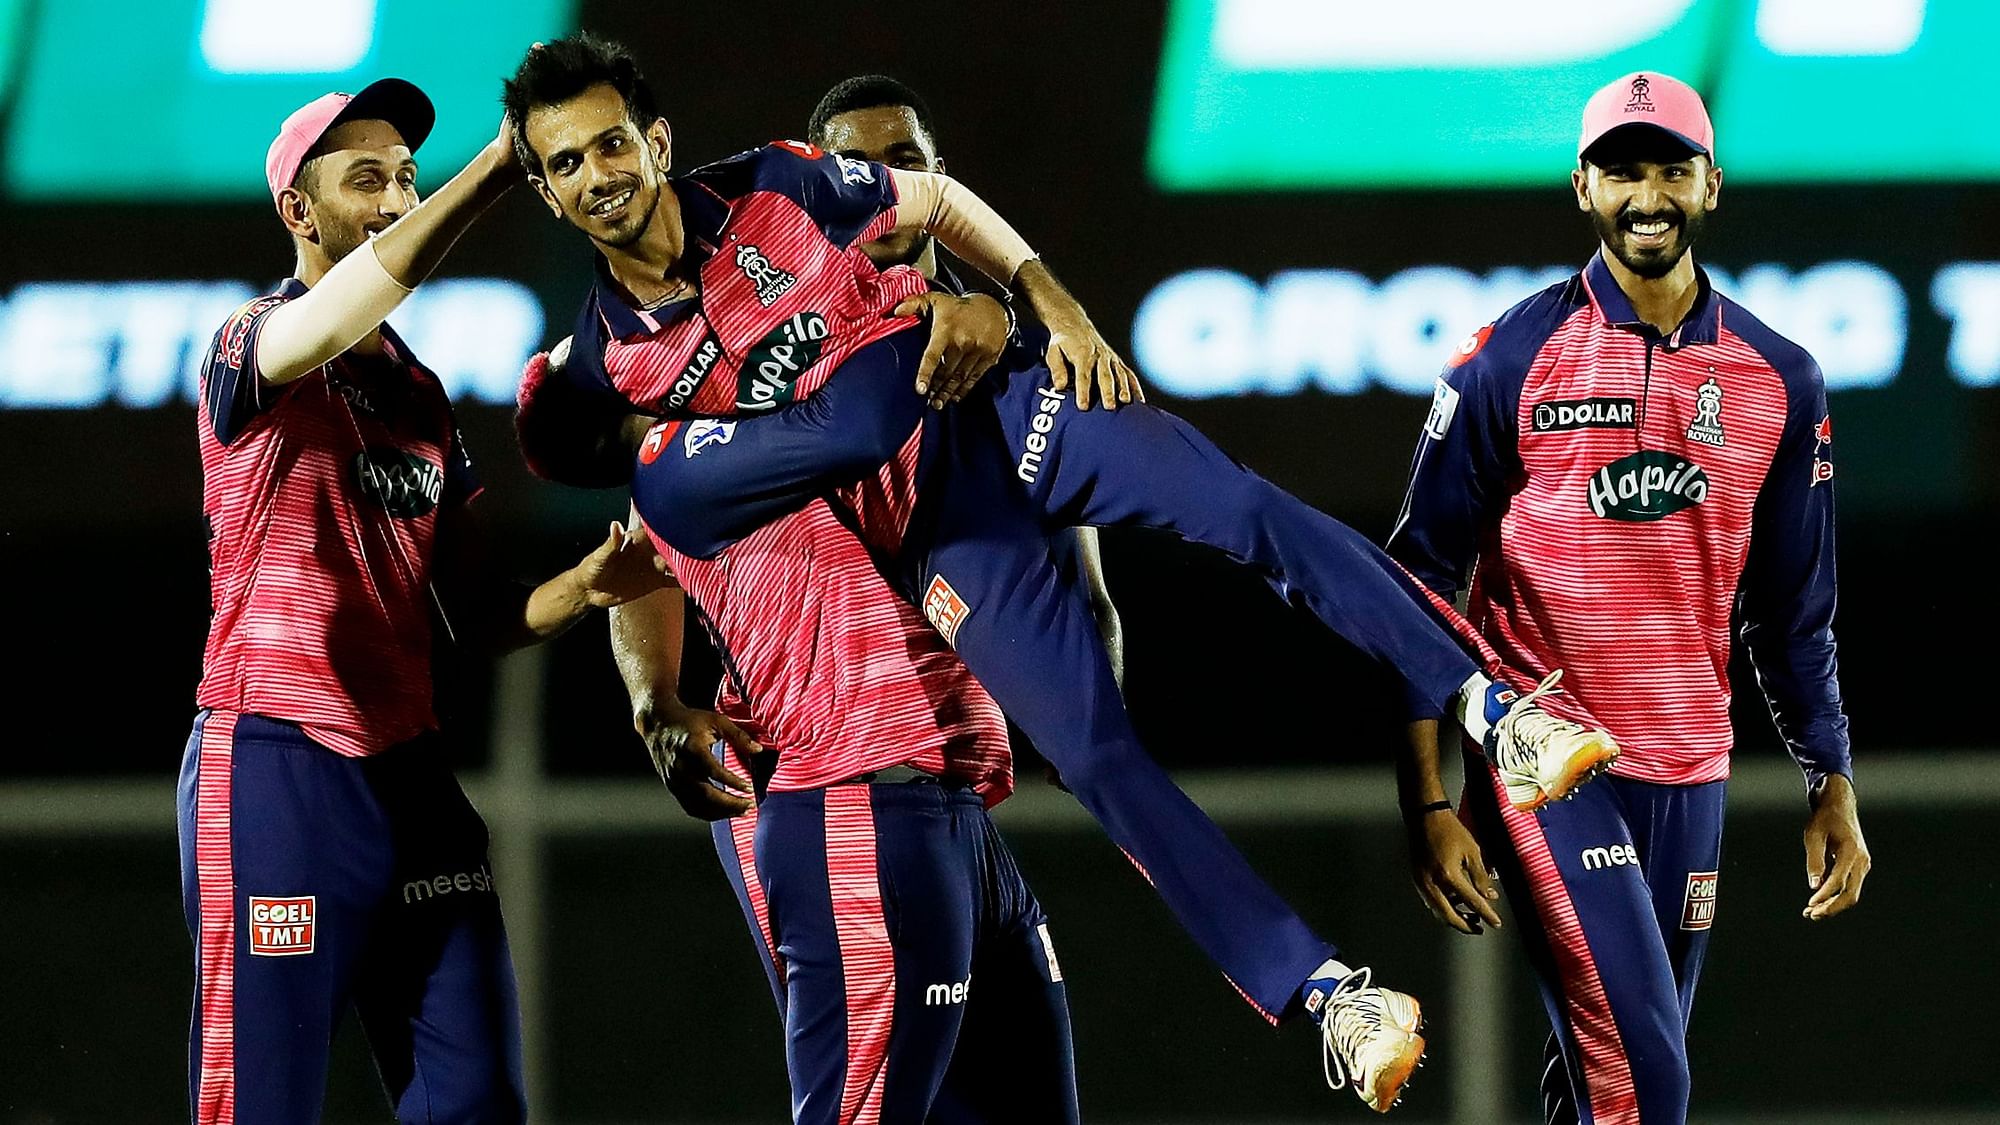 <div class="paragraphs"><p>Yuzvendra Chahal picked 5 wickets against KKR, including taking a hat-trick.&nbsp;</p></div>